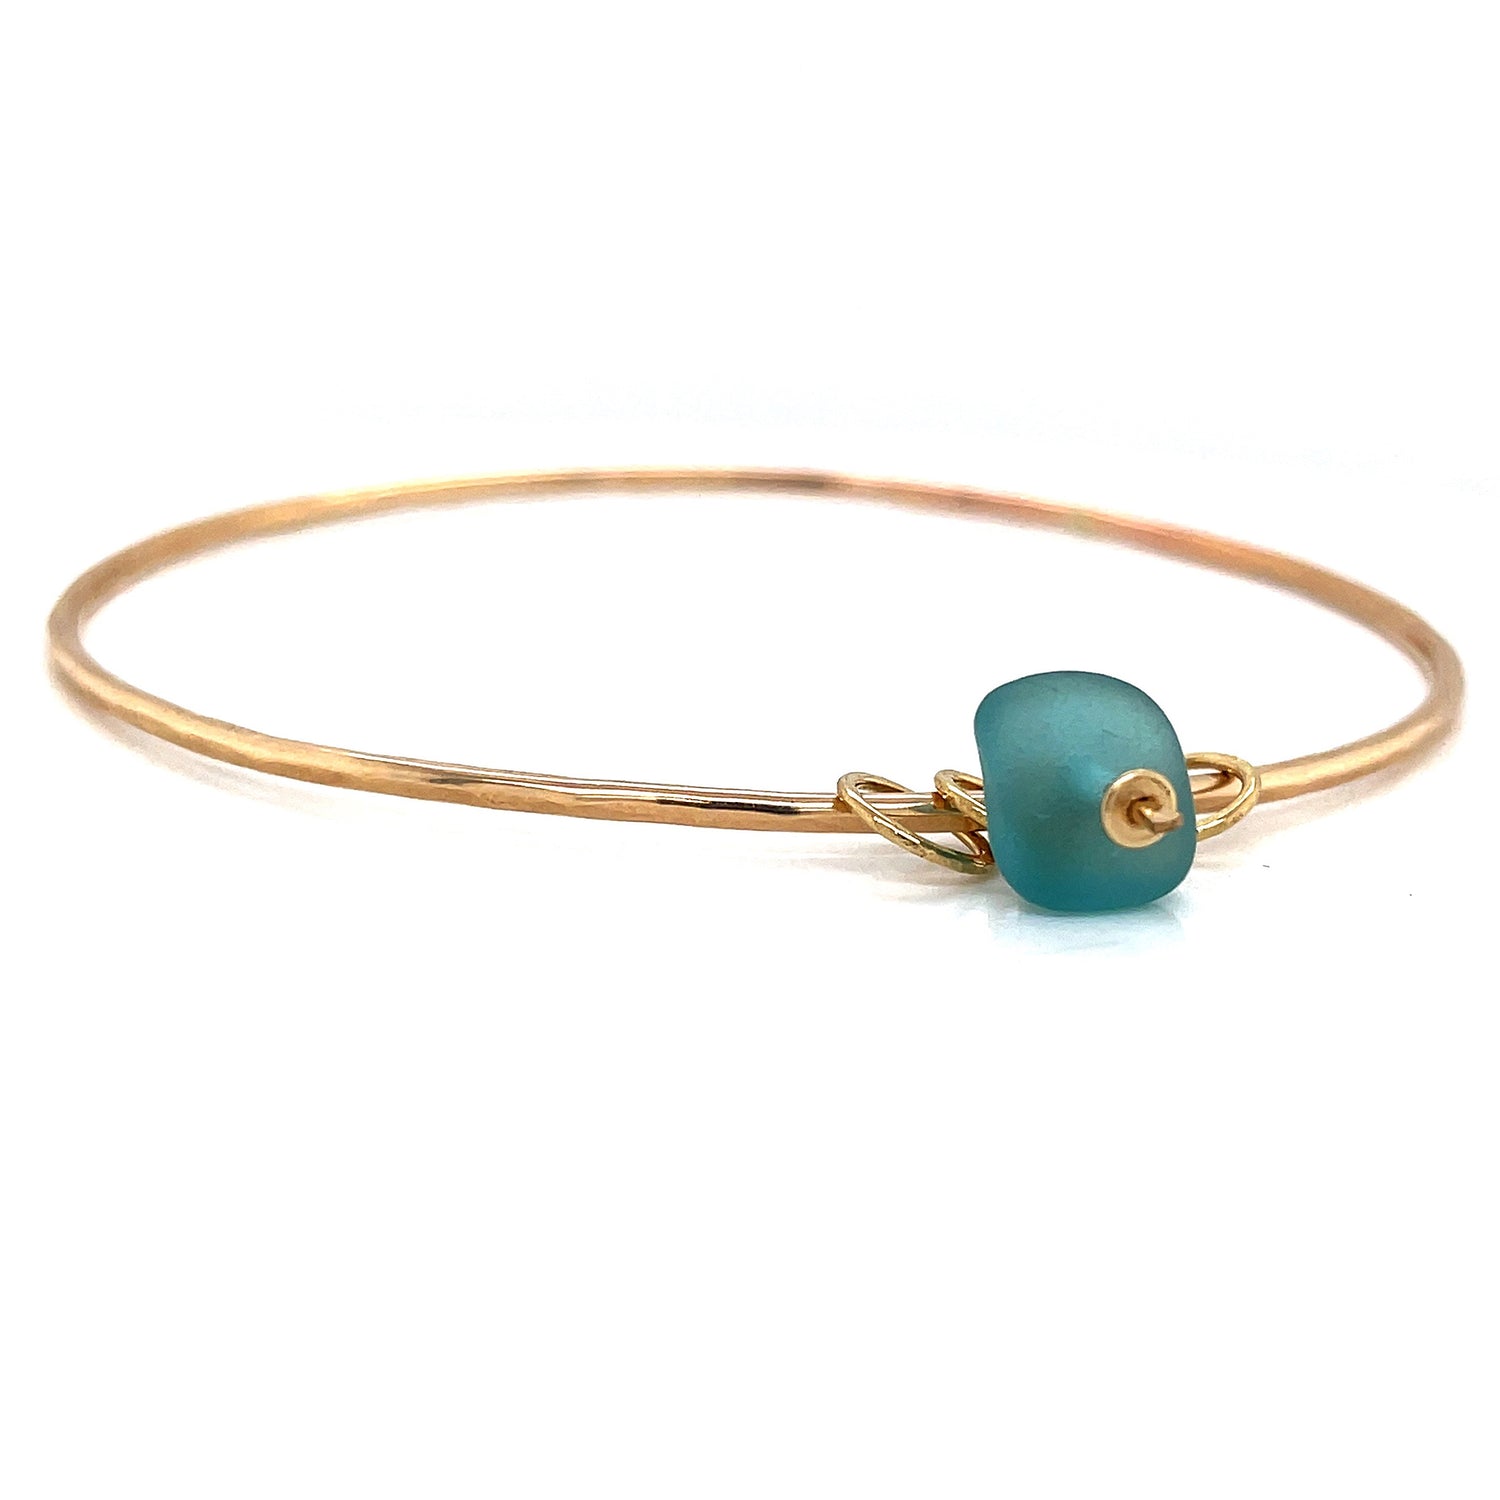 Elegant Turquoise Blue Sea Glass Gold Charm Bangle with Circle Charms – Handcrafted Beach Jewellery for a Stylish Statement